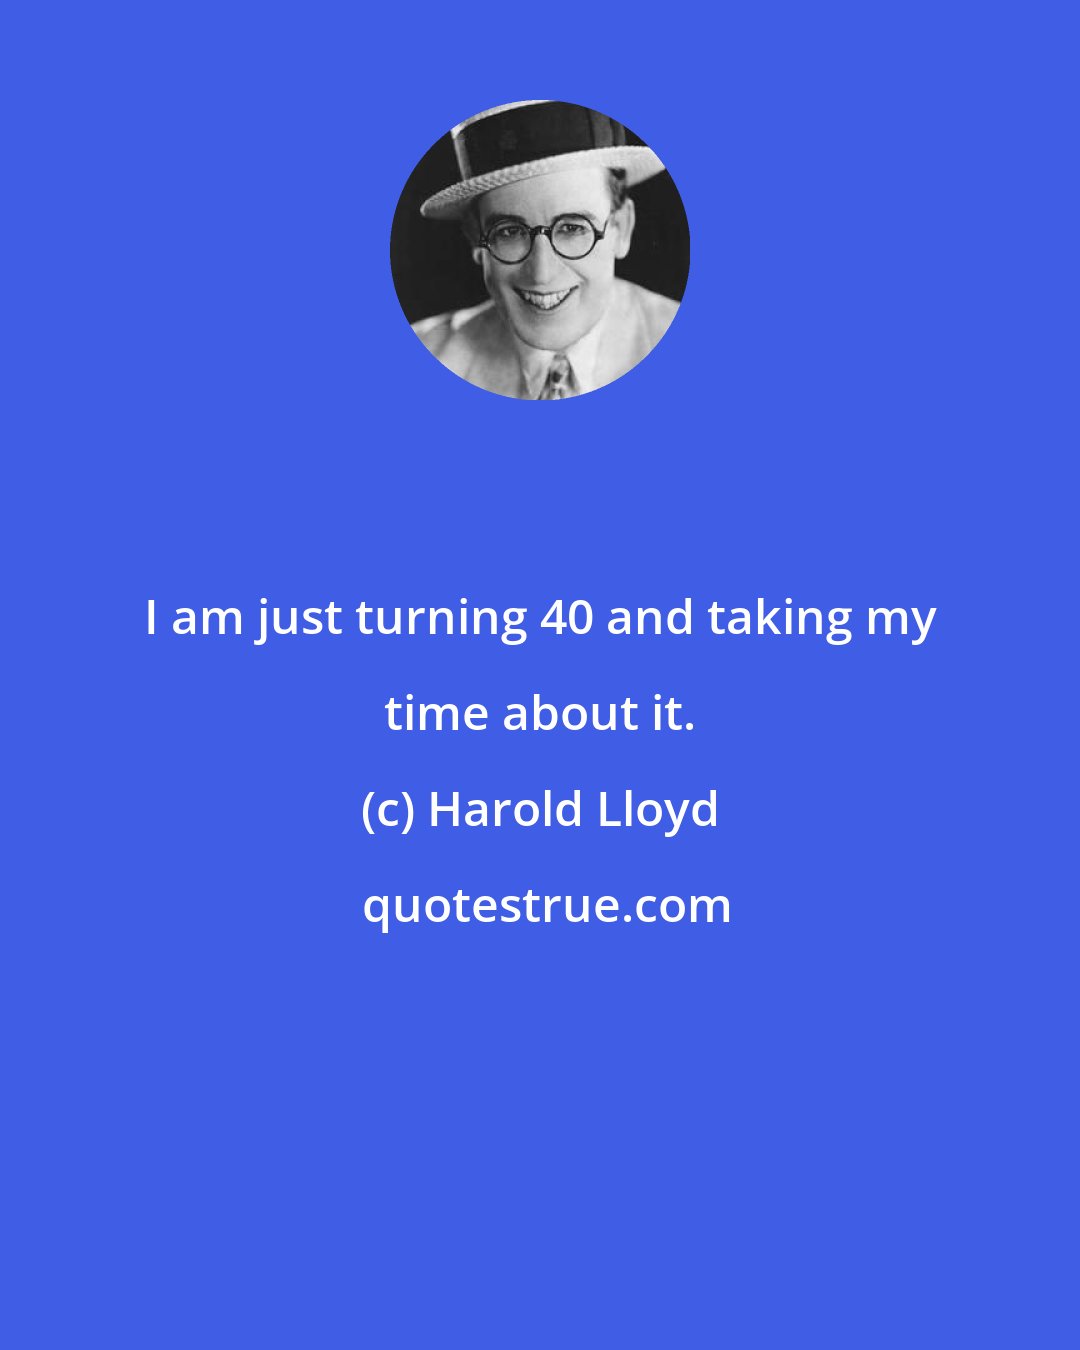 Harold Lloyd: I am just turning 40 and taking my time about it.